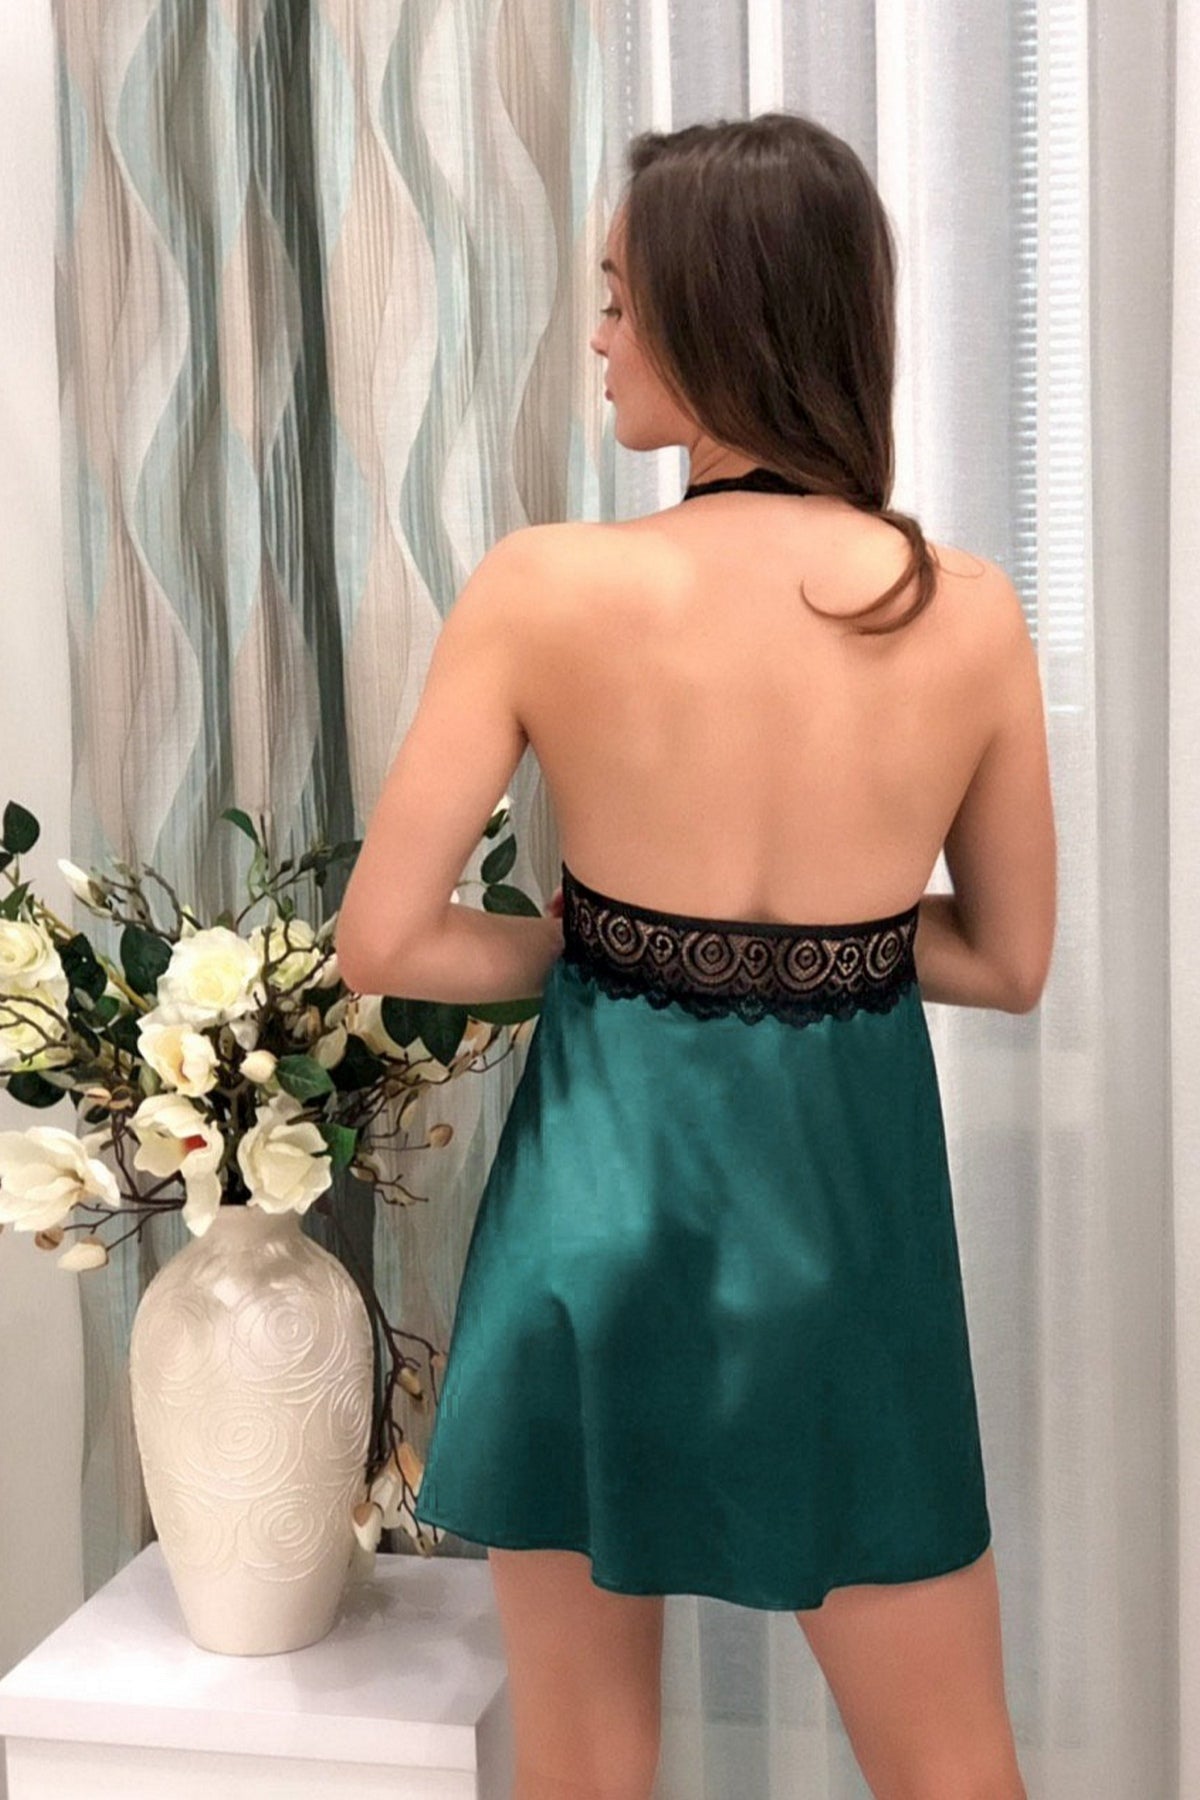 Open Back Design - Sexy Dark Green Satin and Black Lace Lingerie